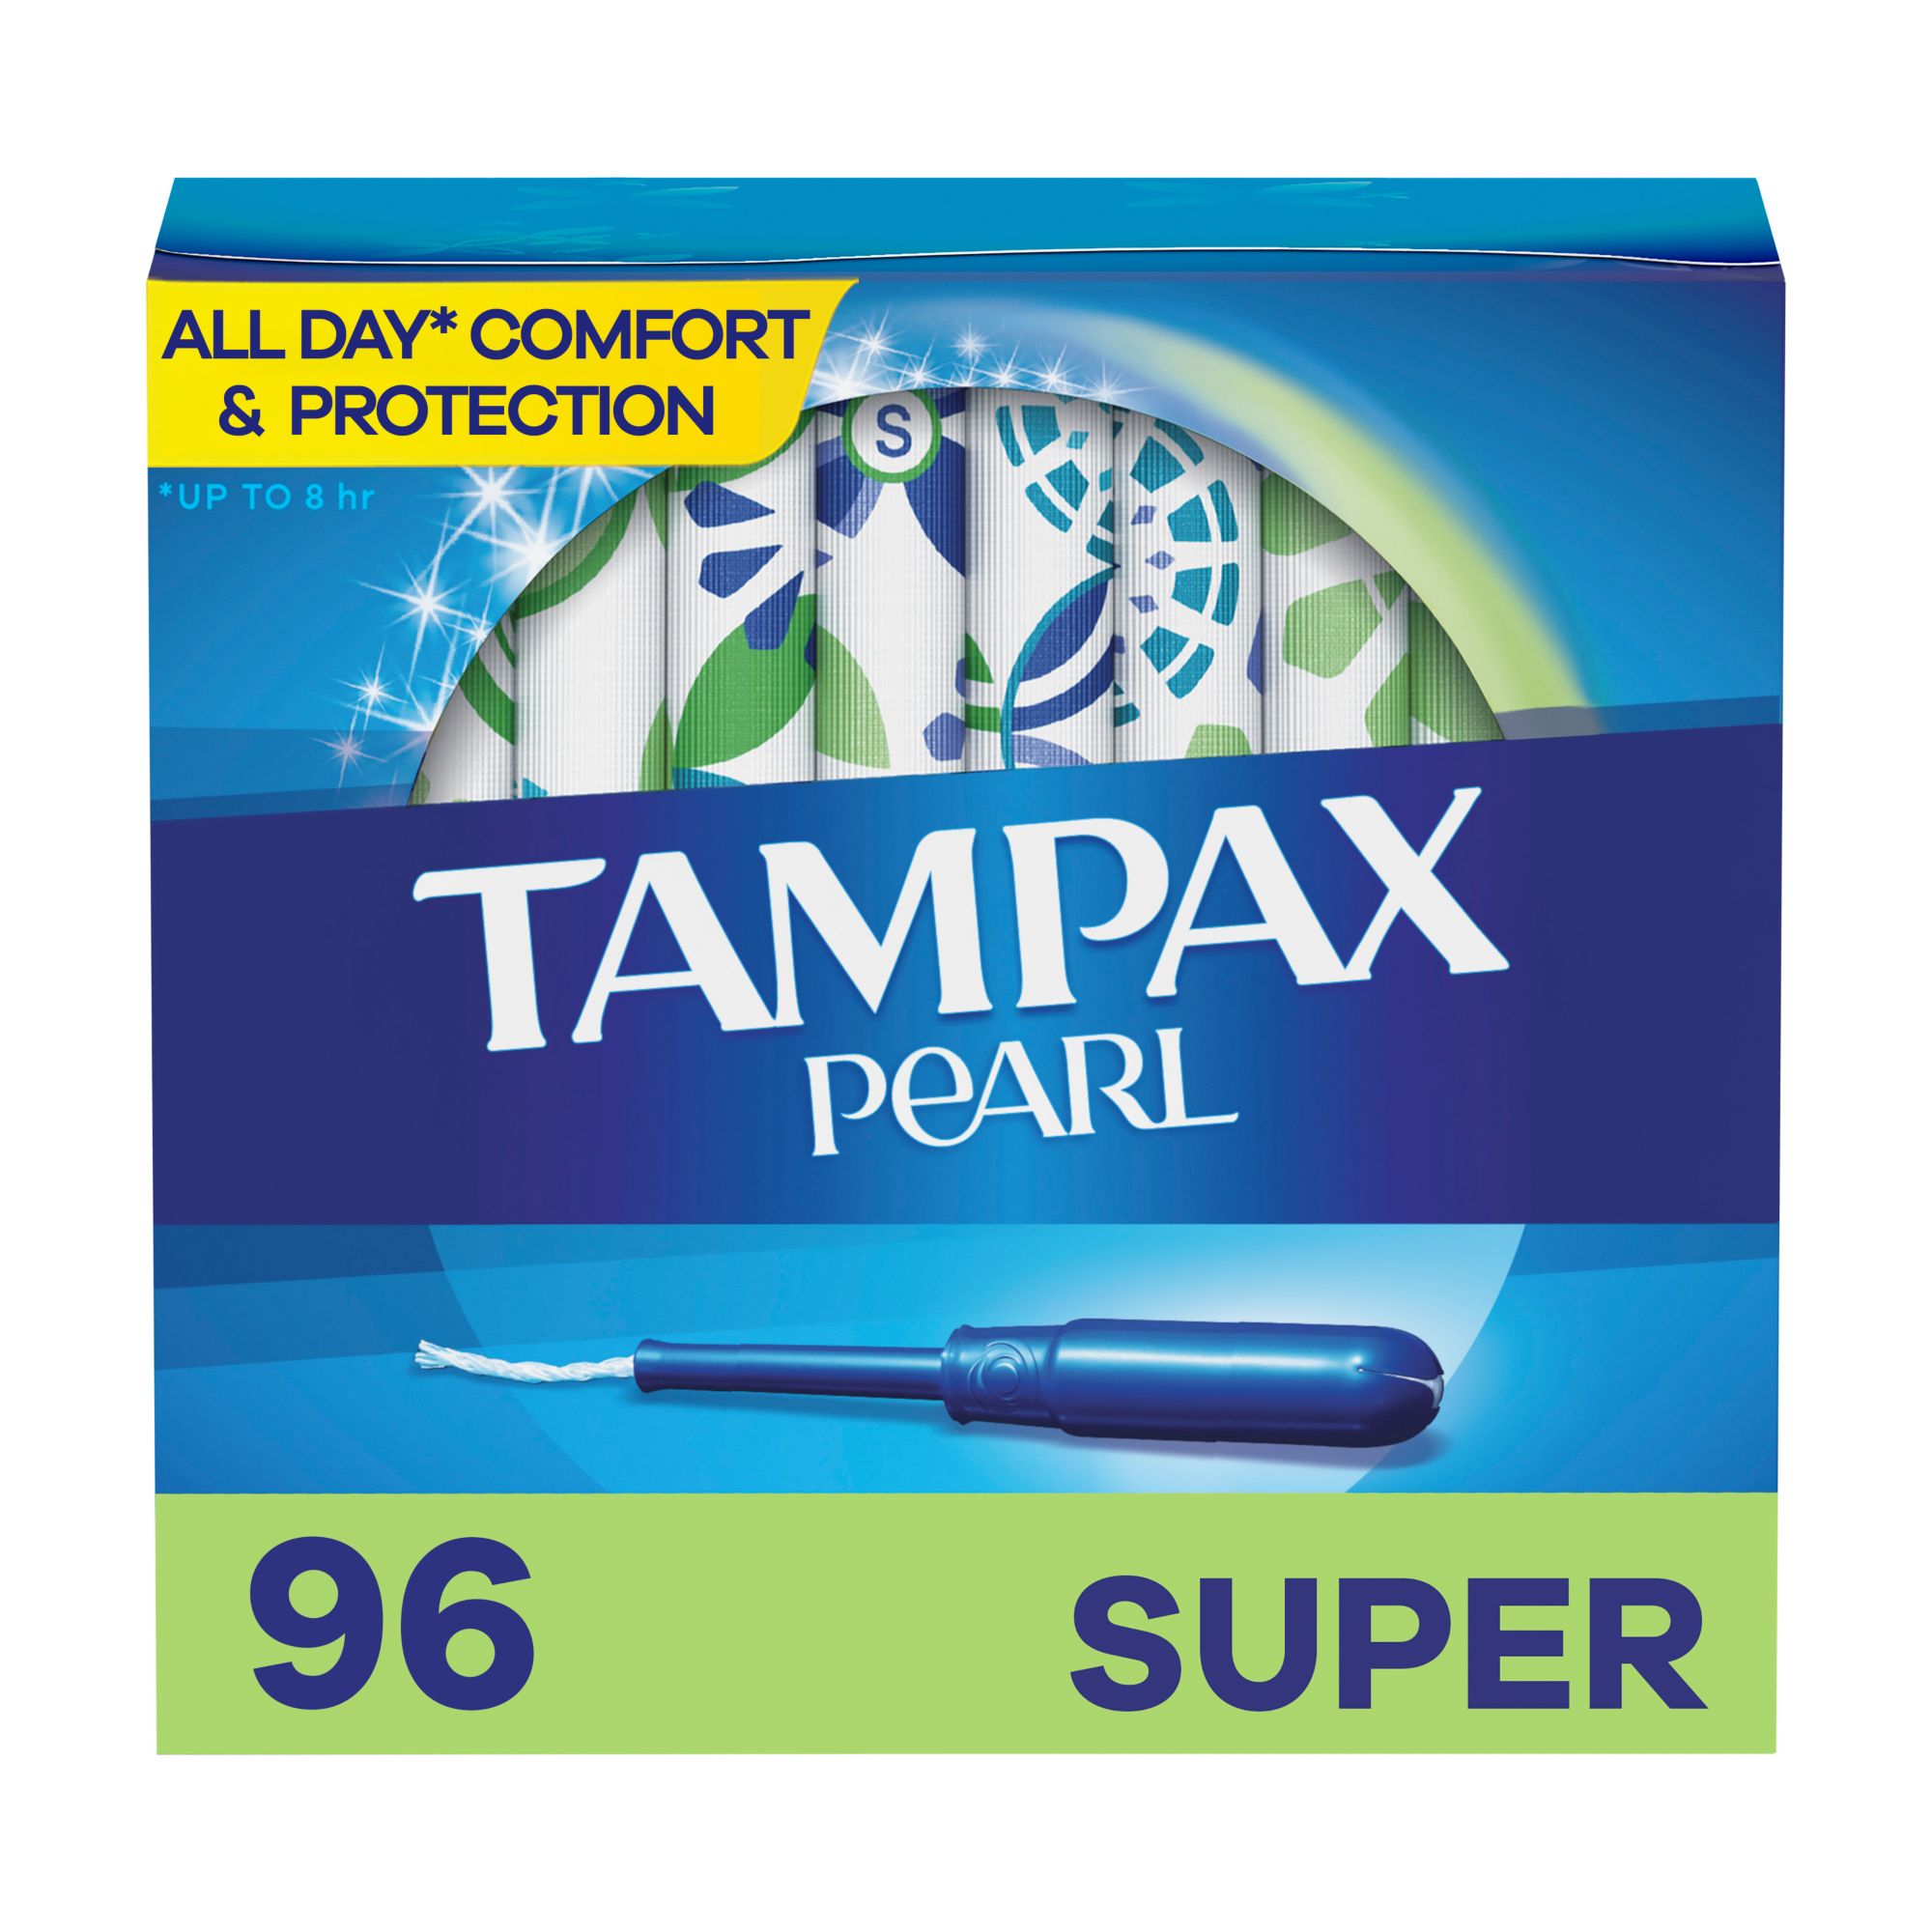 Tampax Pearl Ultra Absorbency Tampons - 18 Count for sale online